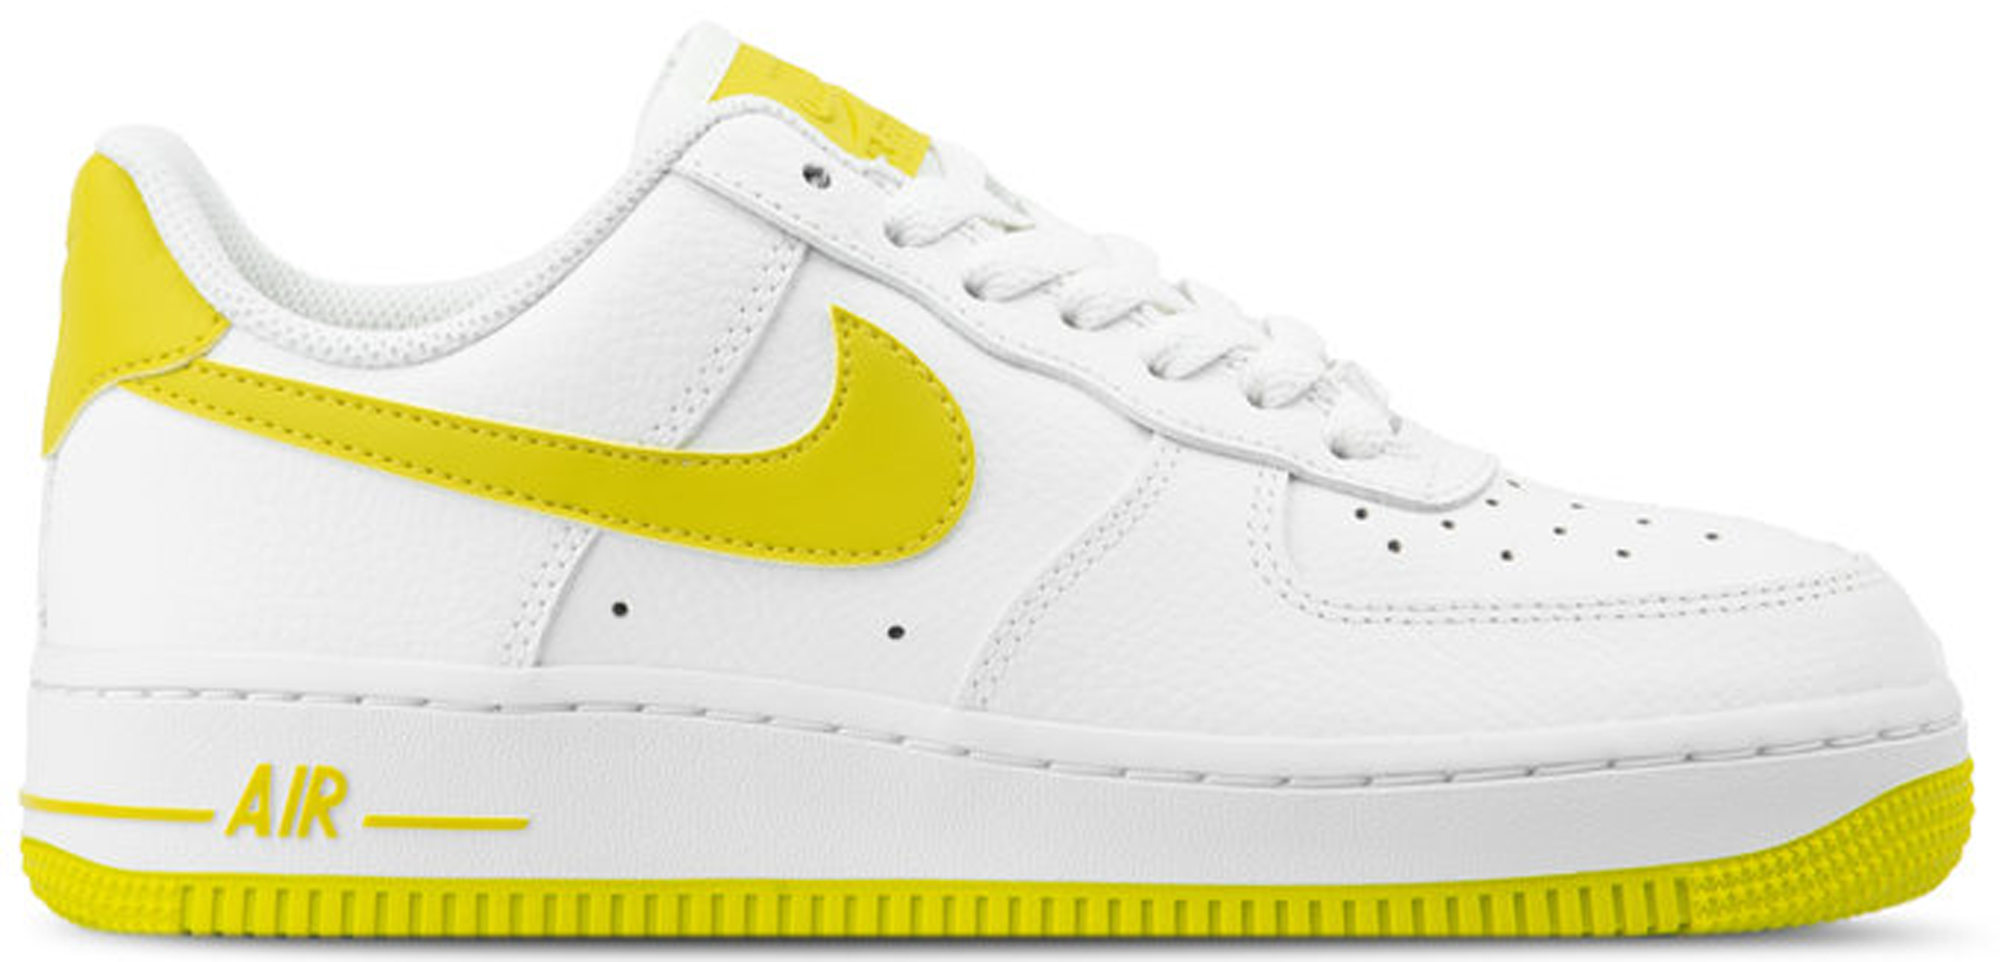 nike air force 1 patent white yellow